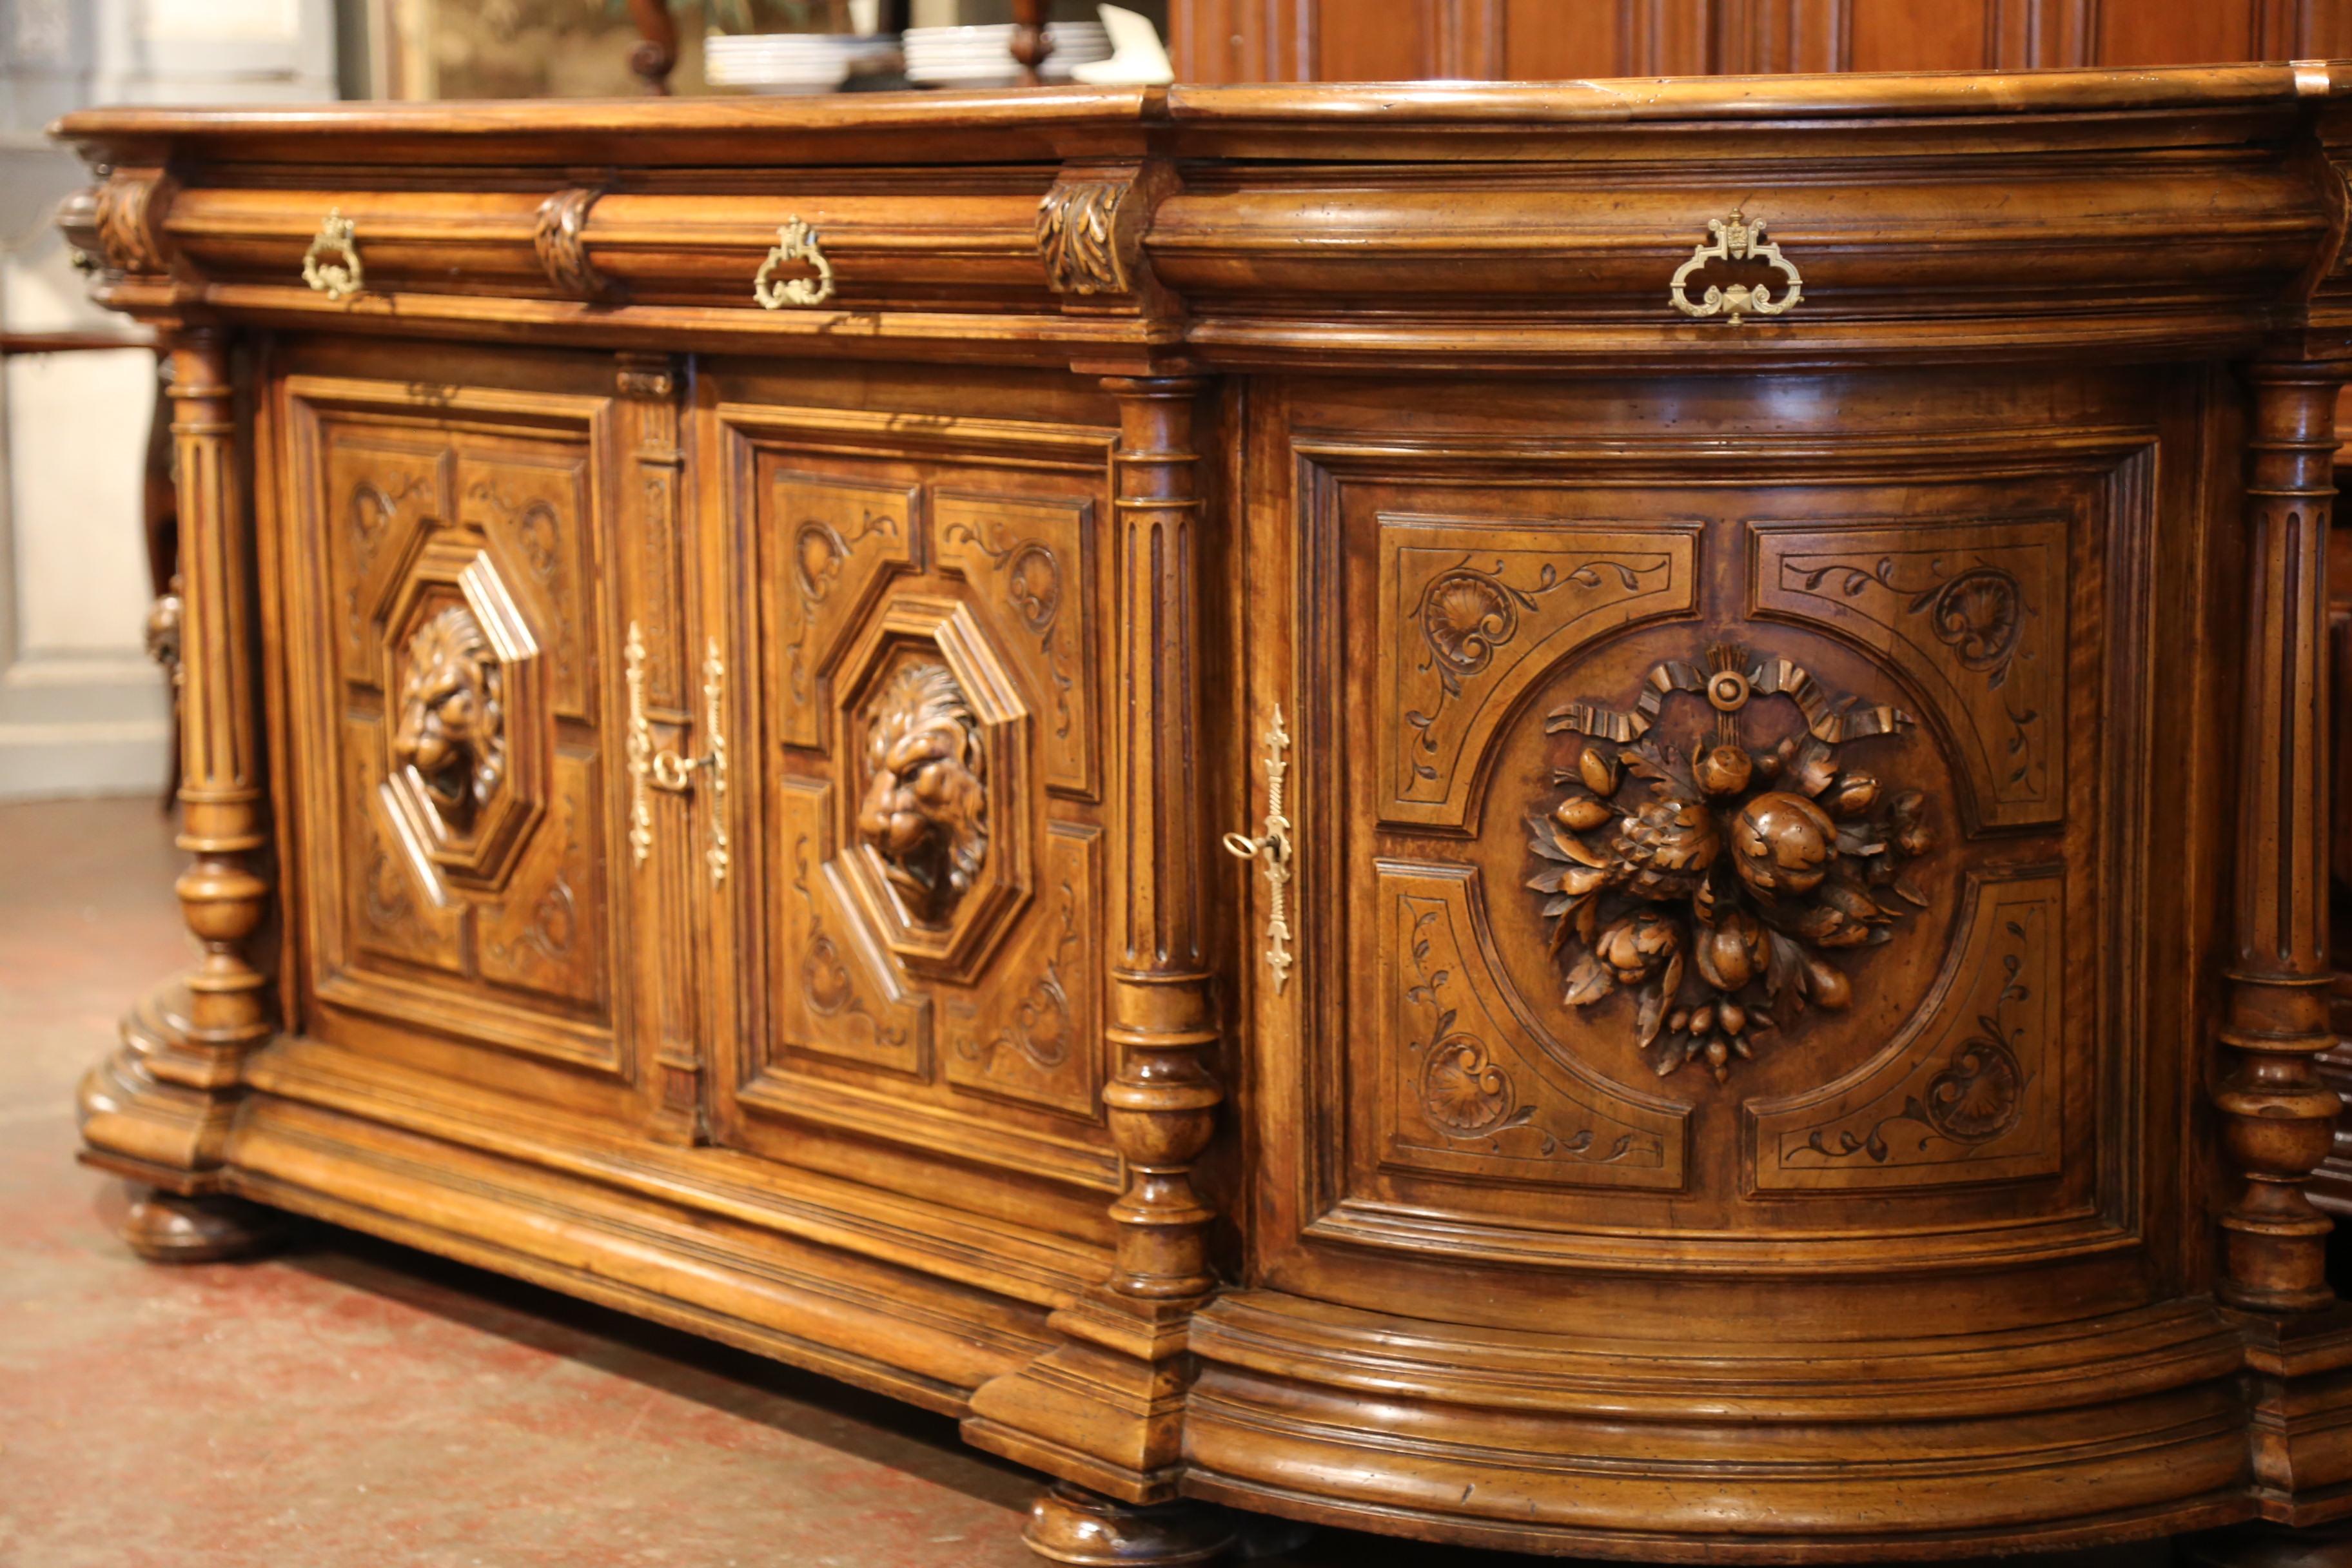 Napoleon III Important 19th Century French Walnut Four-Door Buffet with Carved Medallions